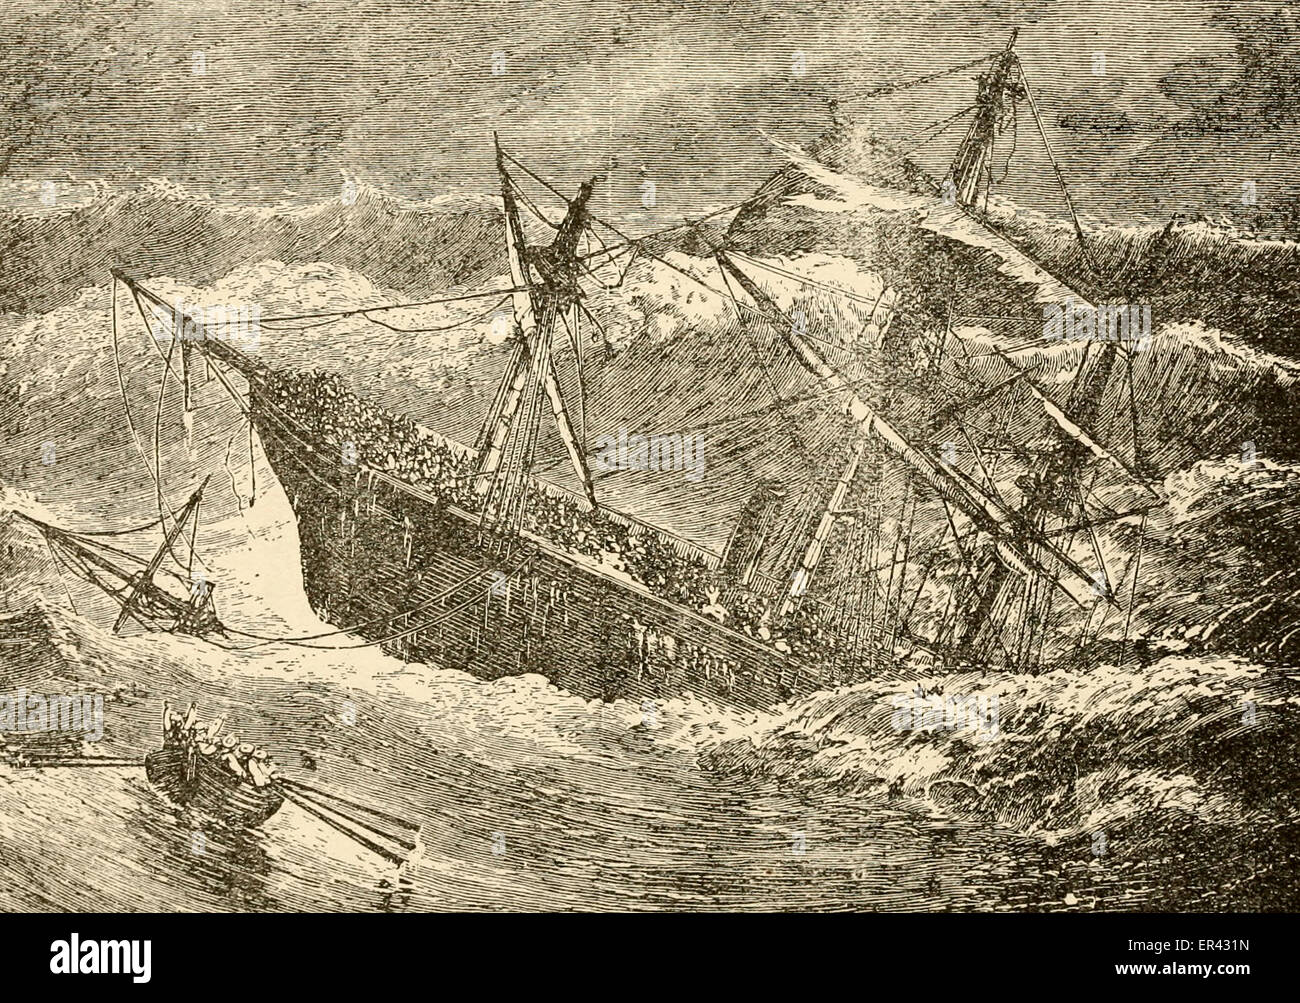 The Sinking of the London  SS London was a British steamship which sank in the Bay of Biscay on 11 January 1866. The ship was travelling from Gravesend in England to Melbourne, Australia, when she began taking in water on 10 January, with 239 persons aboard. The ship was overloaded with cargo and unseaworthy, and only 19 survivors were able to escape the foundering ship by lifeboat, leaving a death toll of 220. January 11, 1866 Stock Photo